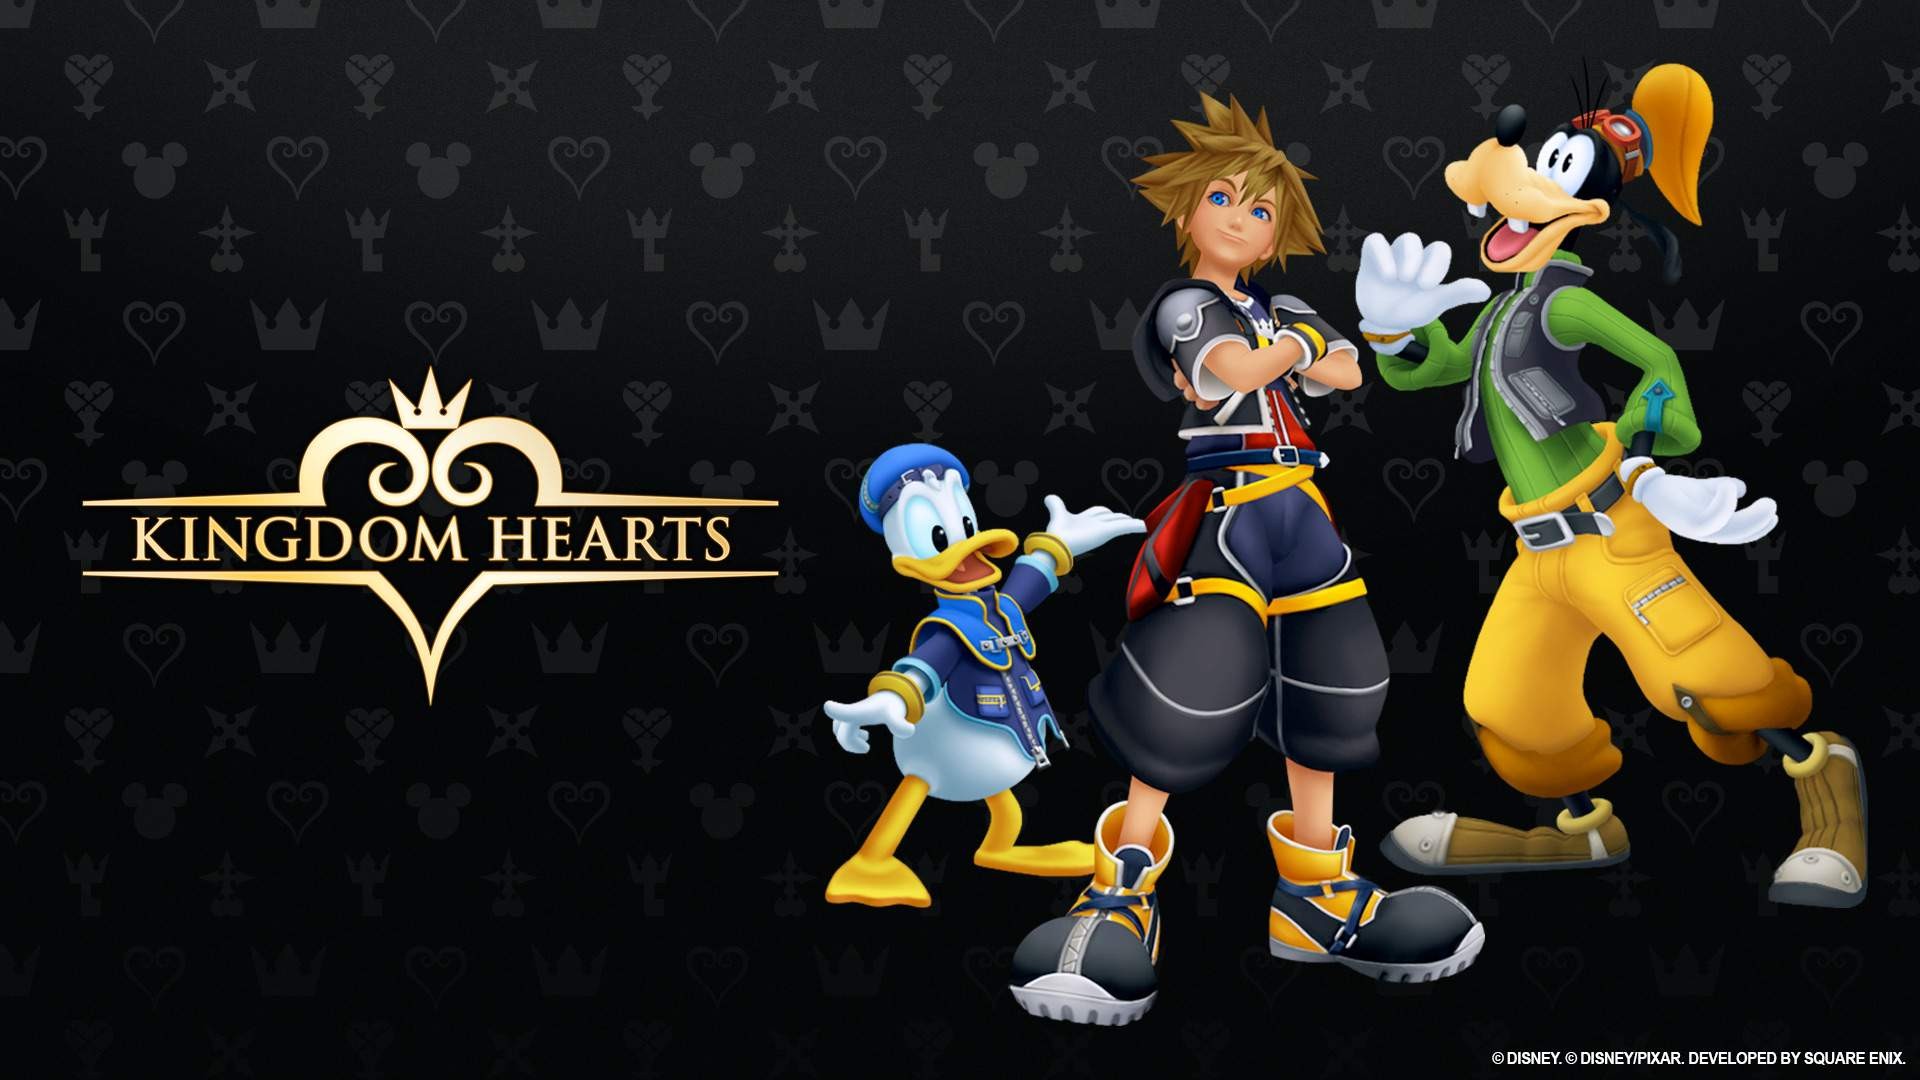 Games from the Kingdom Hearts series are finally coming to Steam